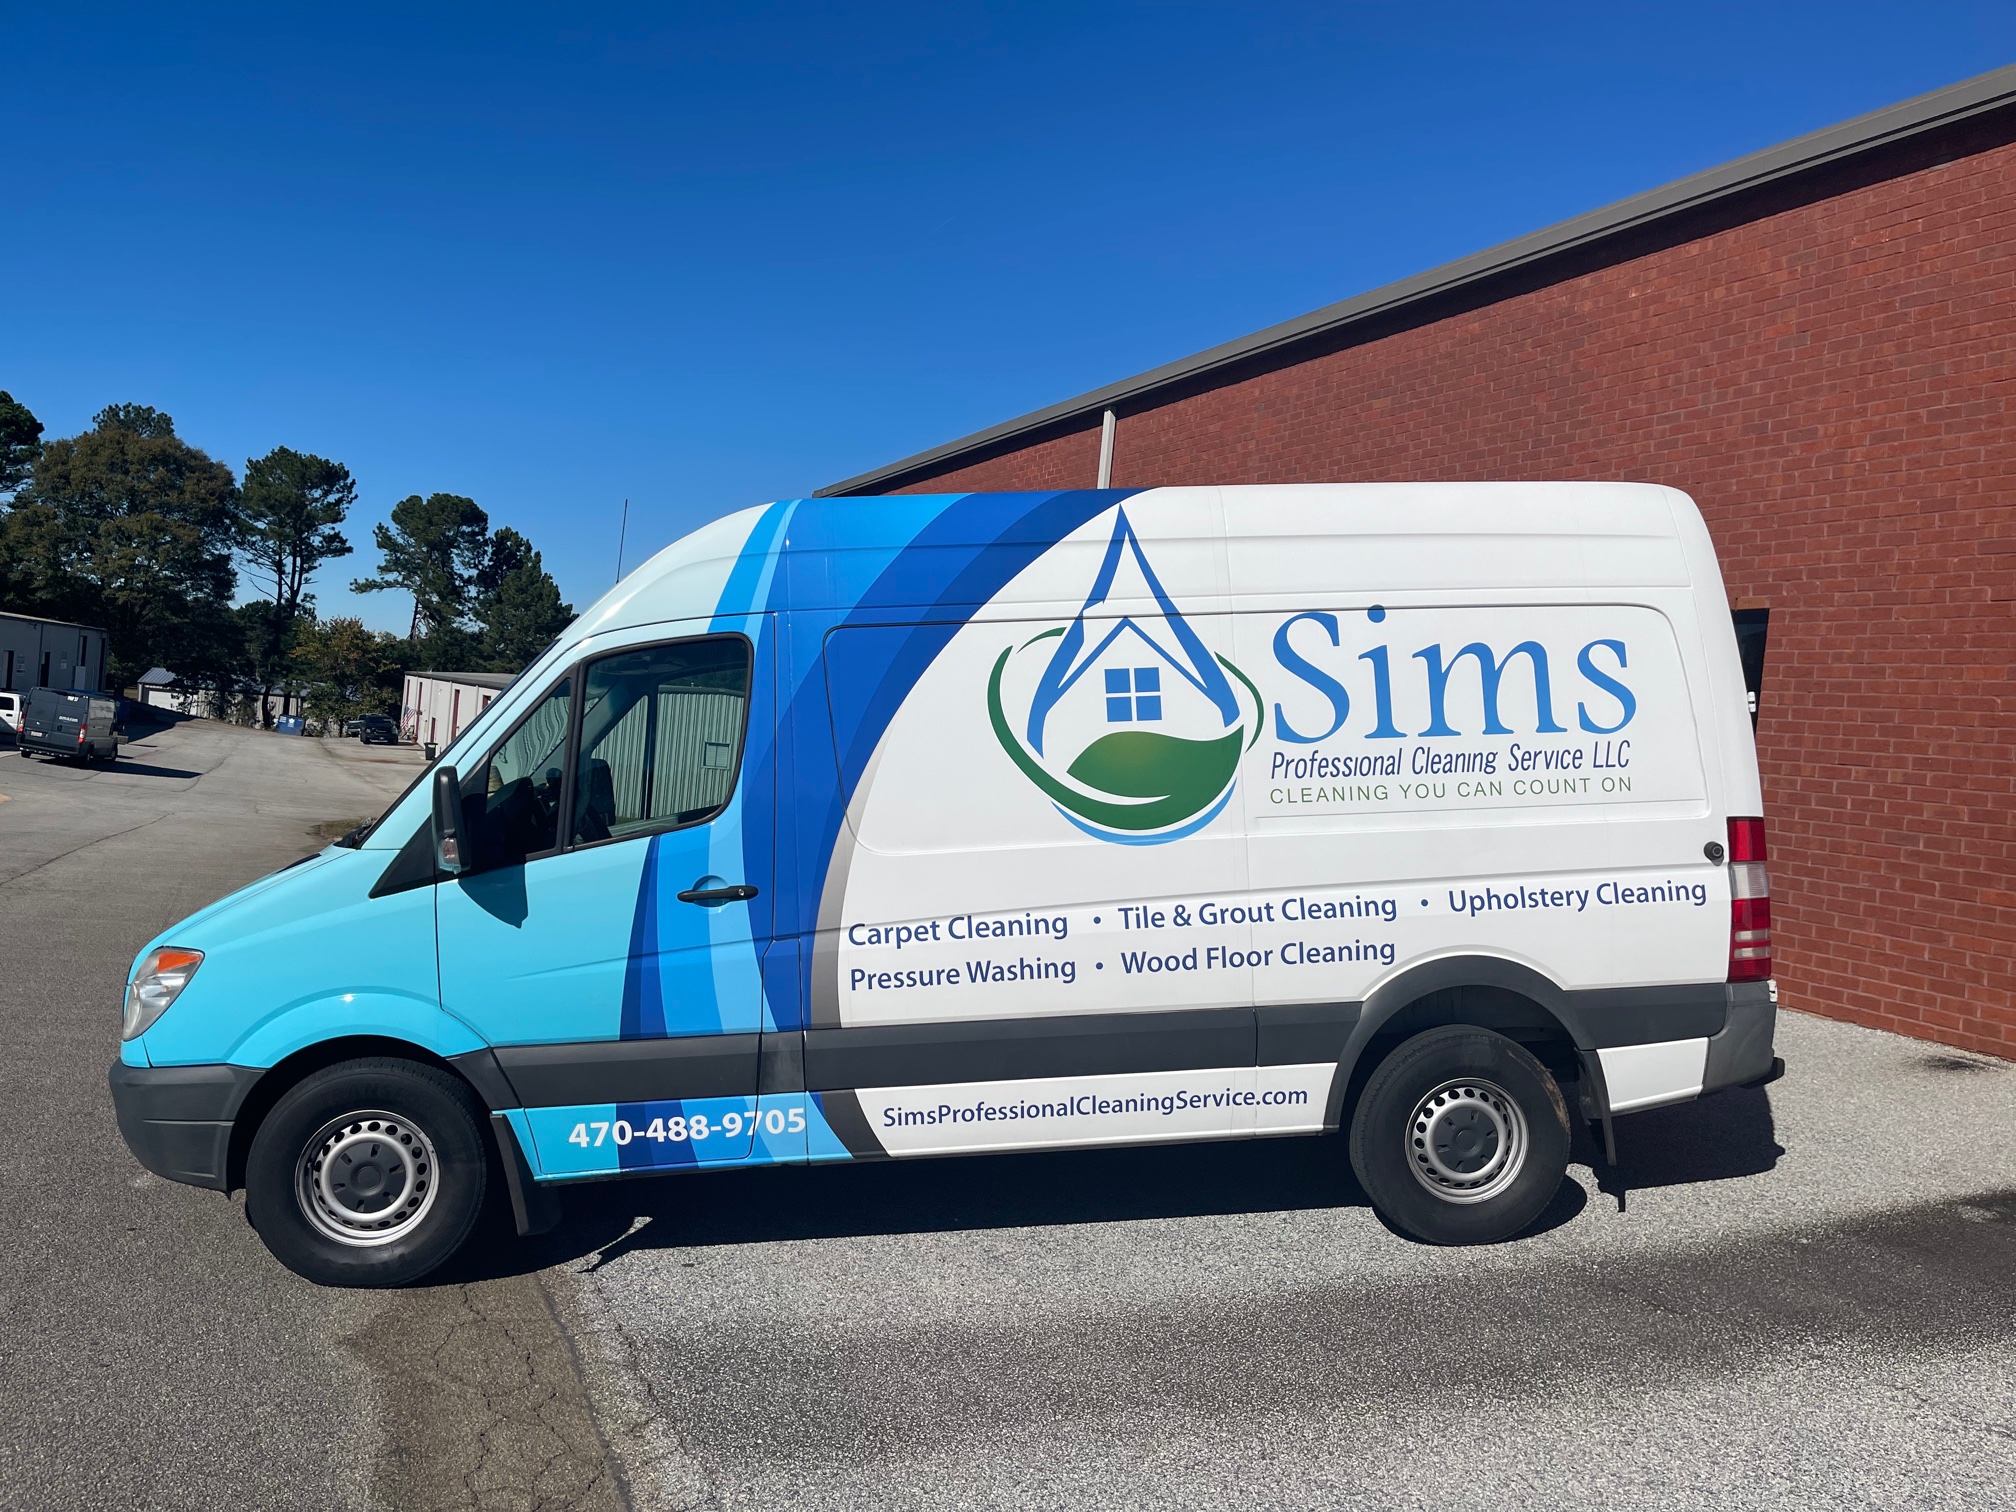 Sims Professional Cleaning Service LLC Expands Cleaning Services into Atlanta and Surrounding Areas